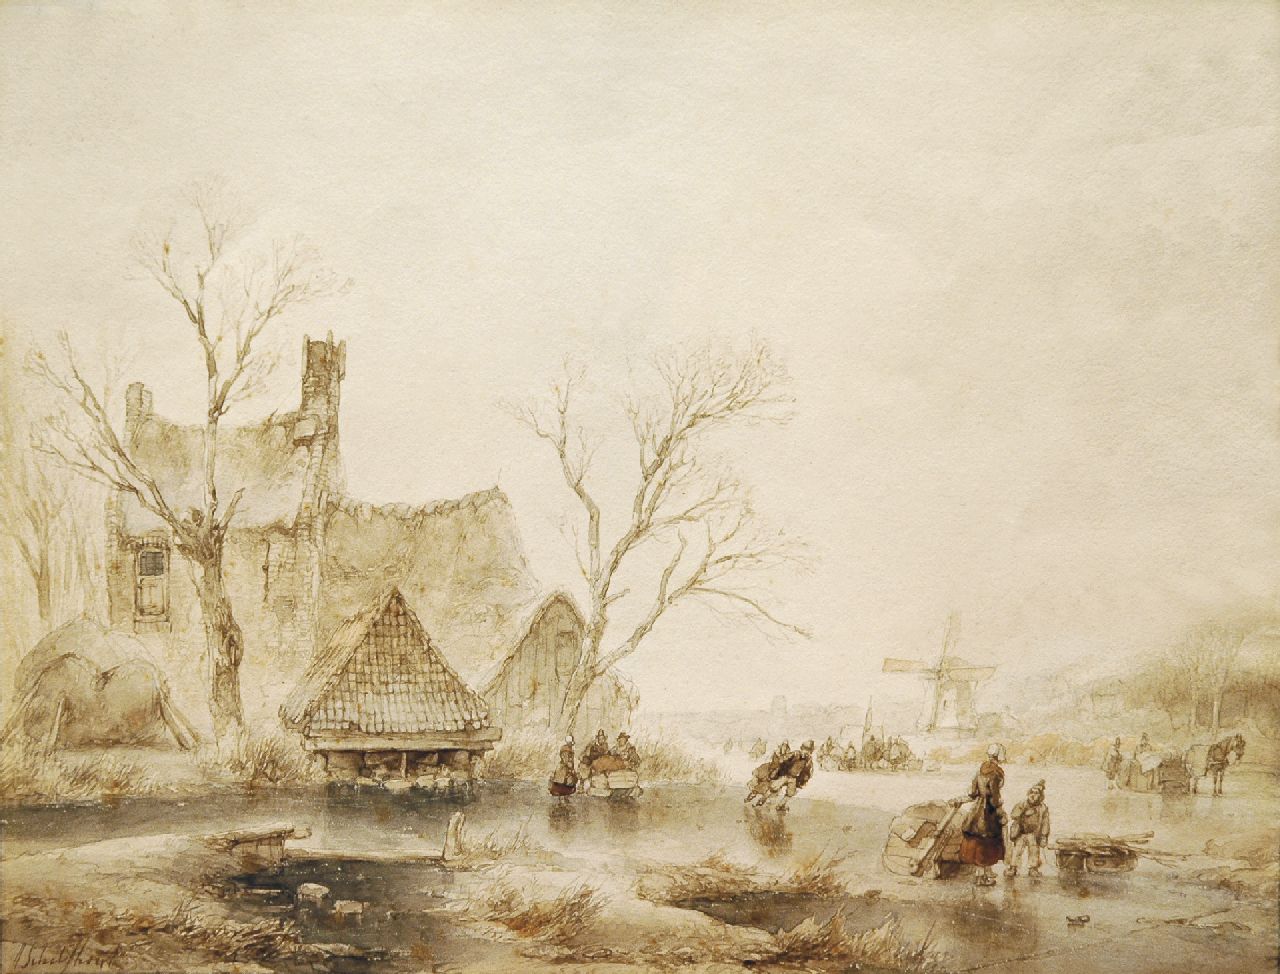 Schelfhout A.  | Andreas Schelfhout, Skaters in a winter landscape, pencil, brush in brown ink and black ink on paper 24.5 x 30.2 cm, signed l.l.